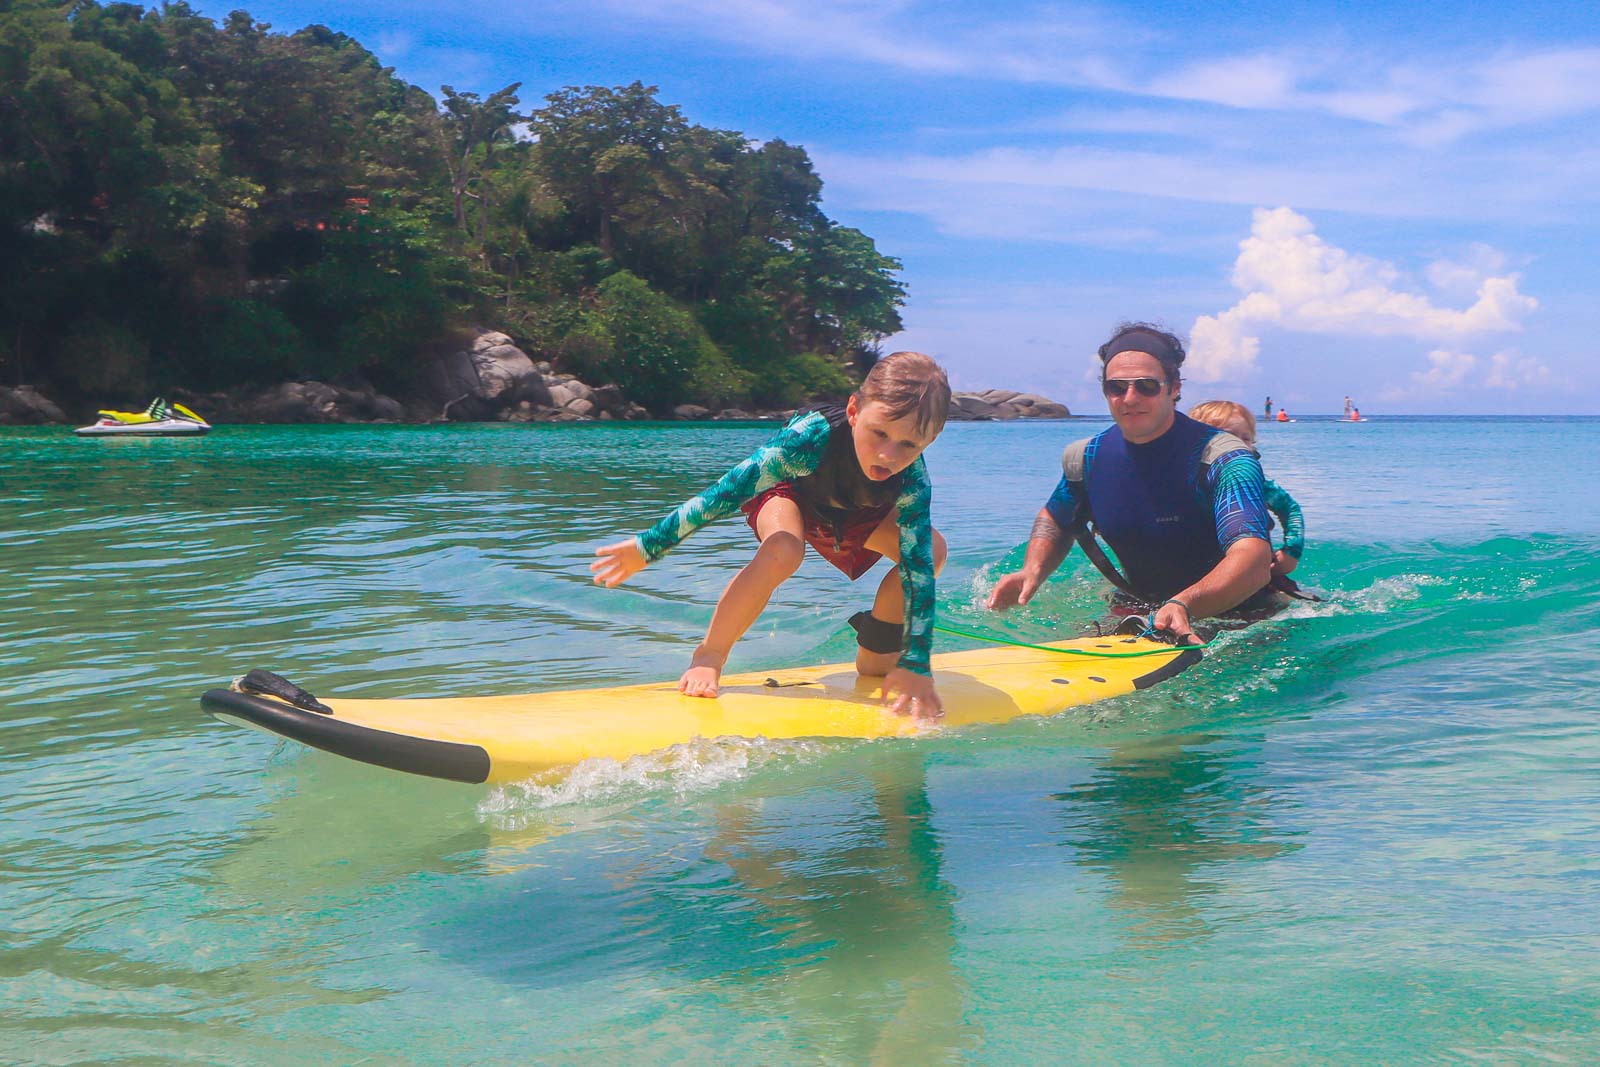 kid learning to surf on turquoise water in thailand